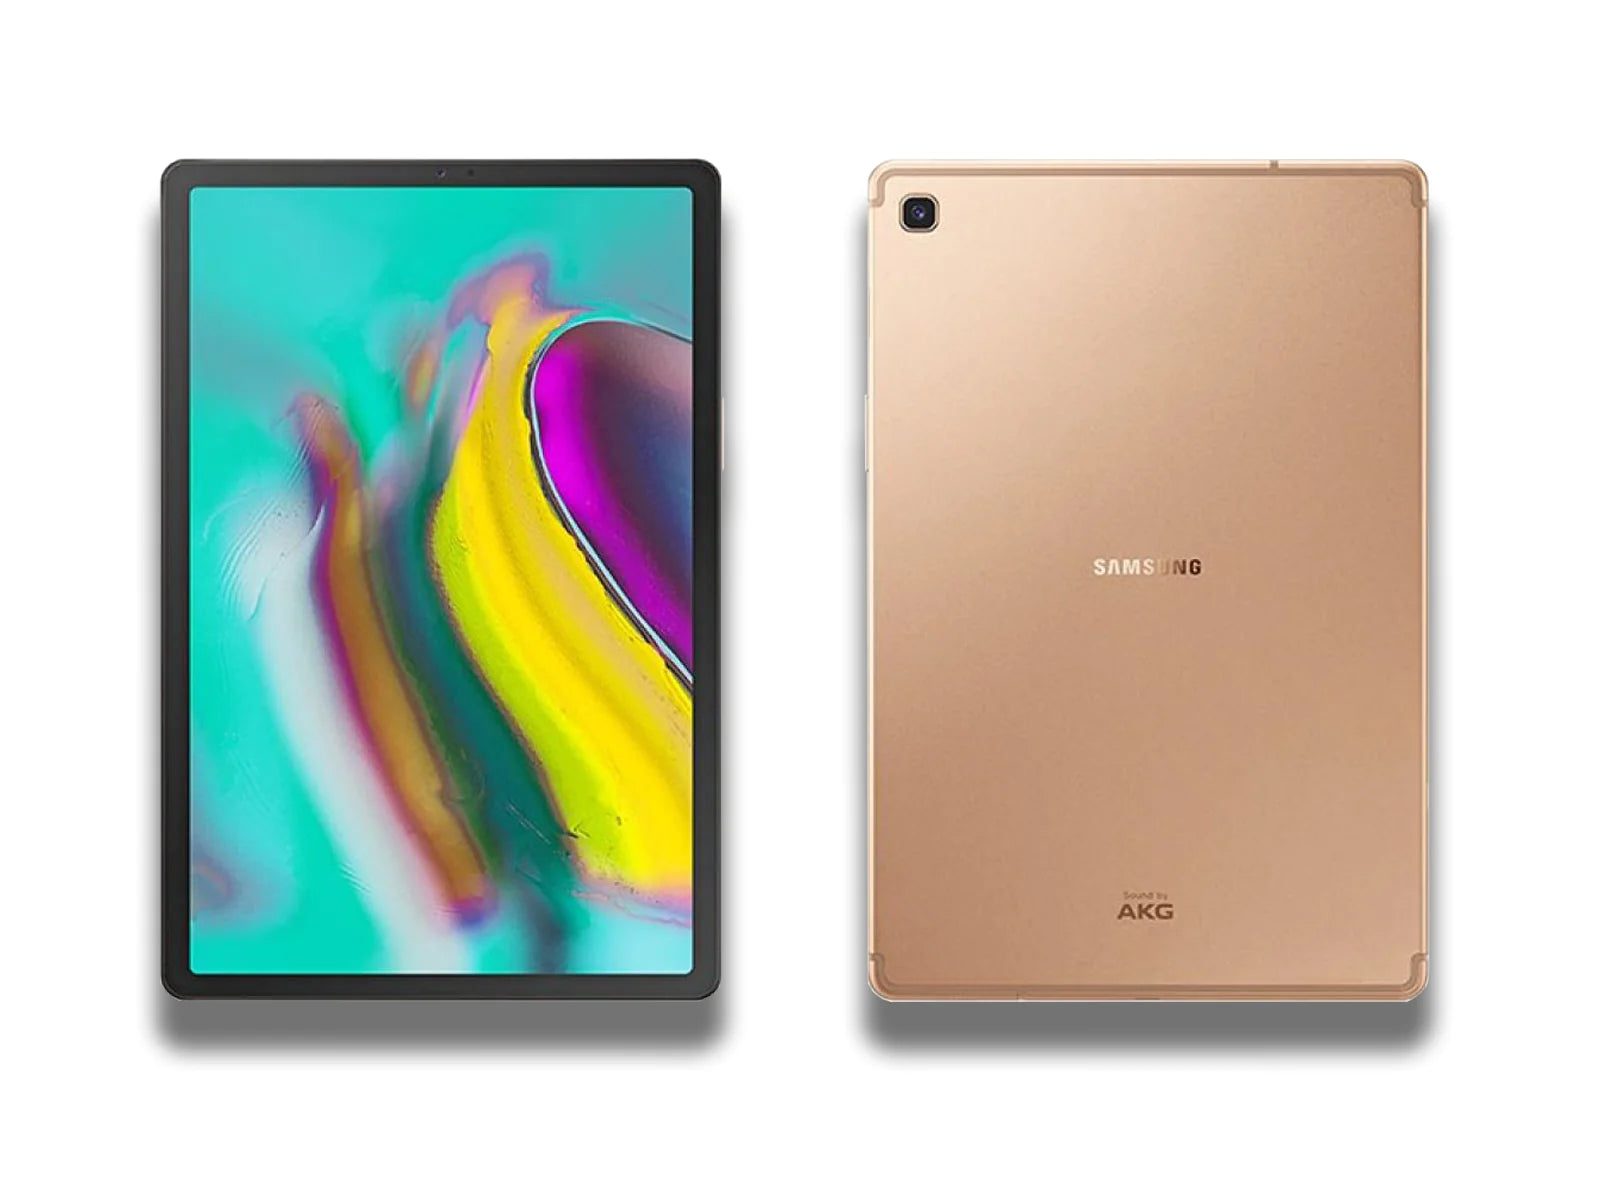 Image-of-the-back-and-front-of-the-gold-samsung-galaxy-tab-s5e-lte-tablet-on-the-white-background